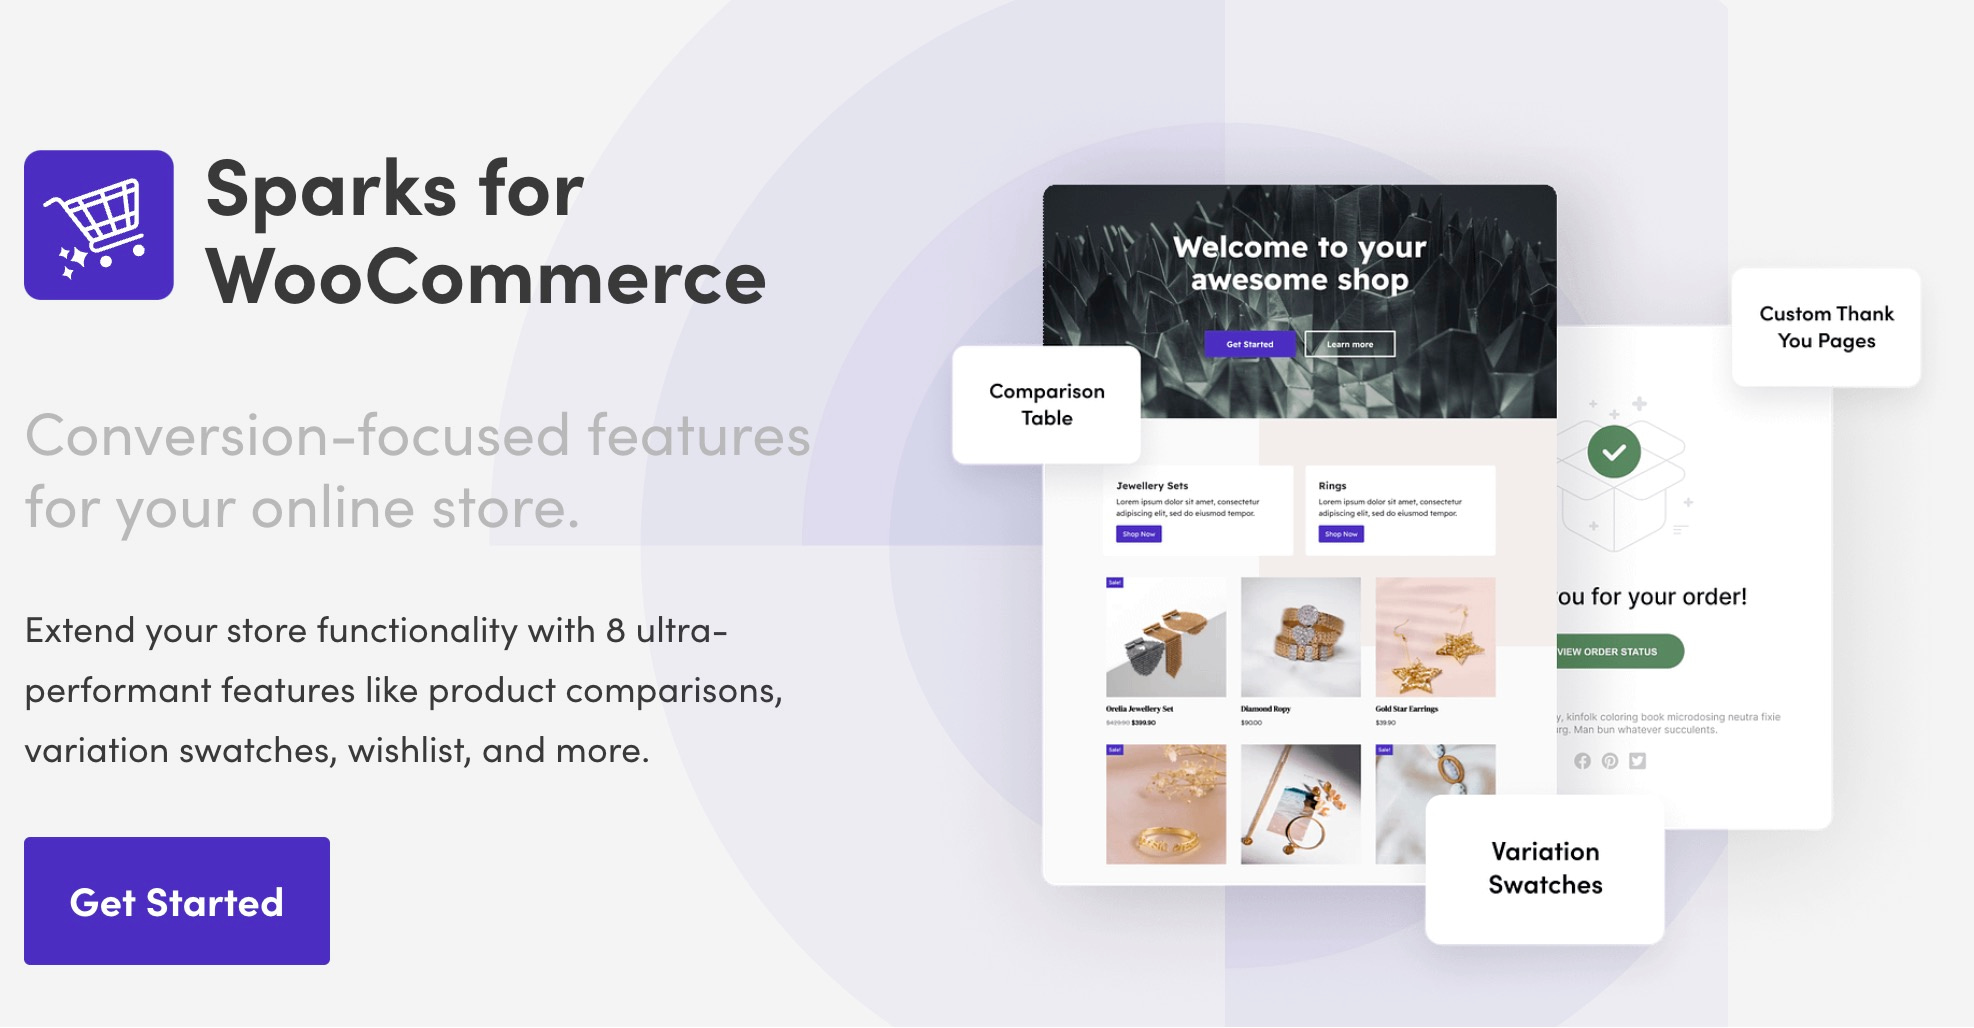 The Sparks for WooCommerce homepage.